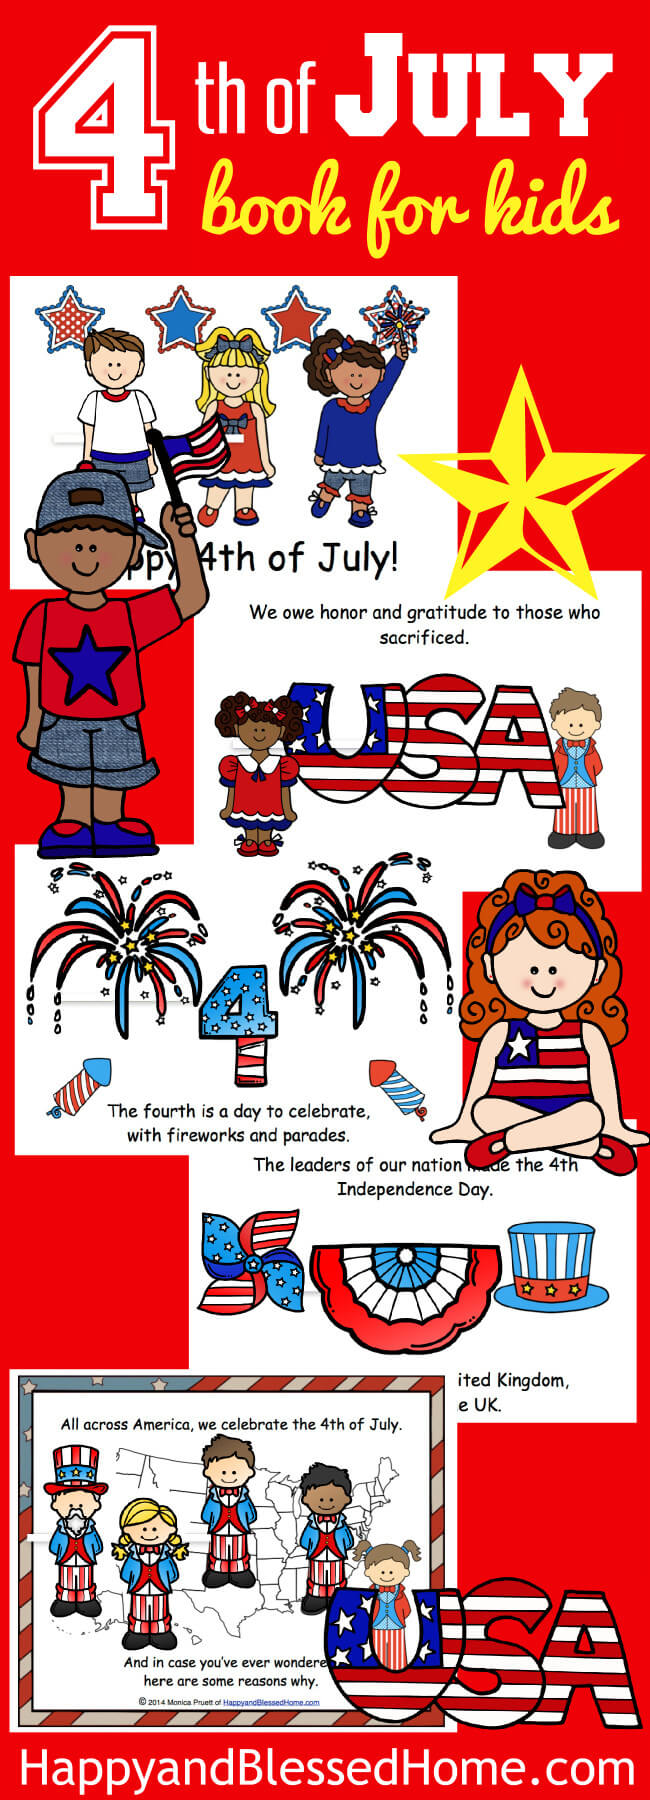 FUN Patriotic 4th of July Book for Kids by HappyandBlessedHome.com